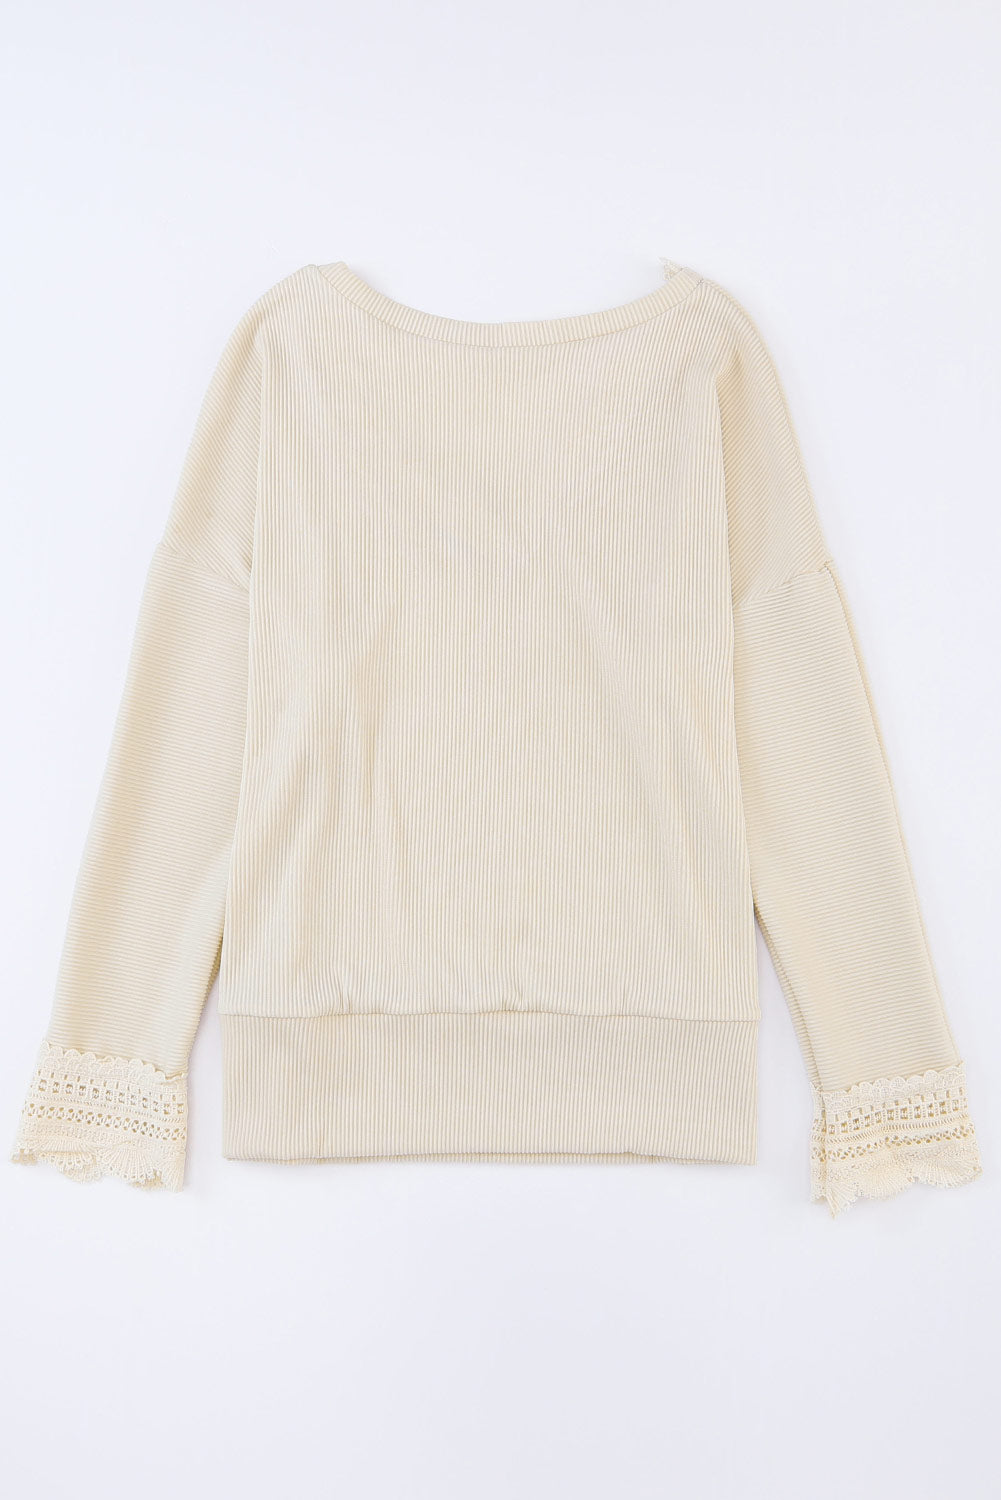 Apricot Ribbed Texture Lace Trim V Neck Long Sleeve Top-11